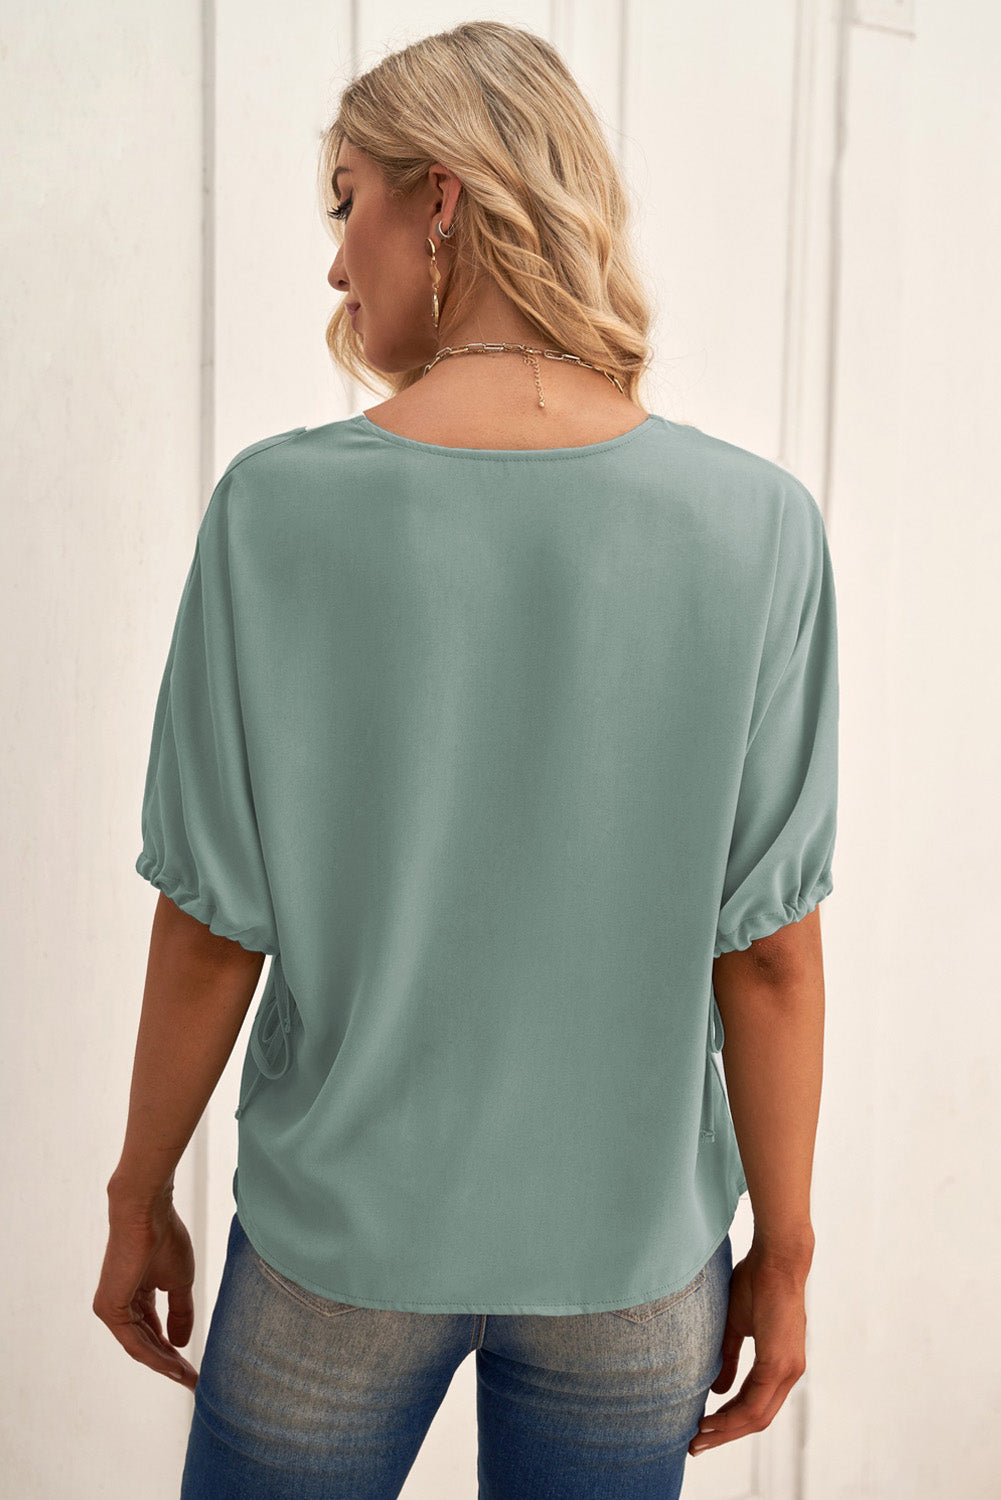 Contrasting V-Neck Cuff Blouse with Drawstring